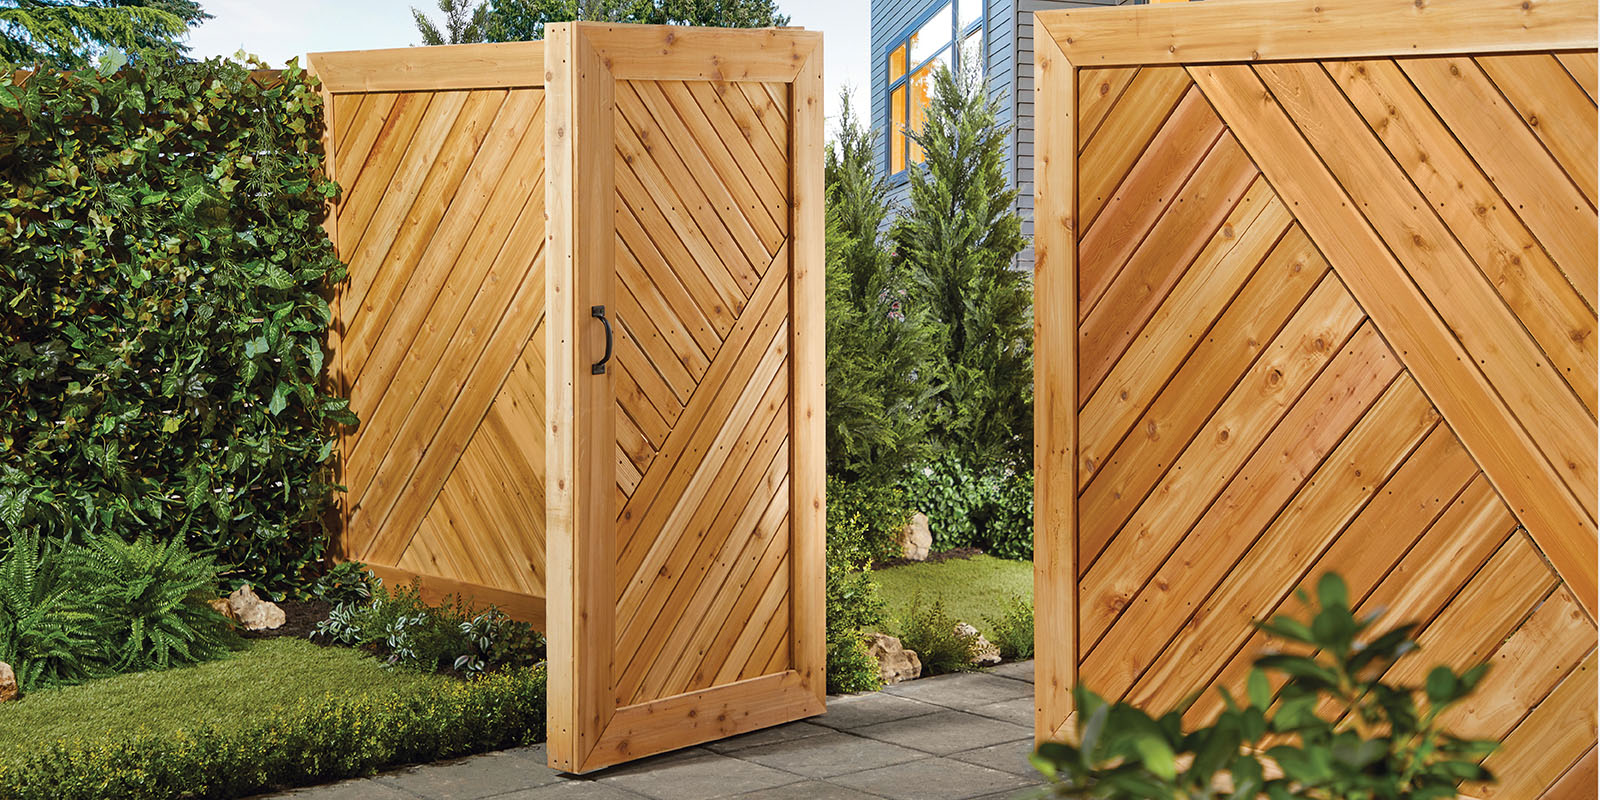 Heres How to Build a Stylish Fence Gate Home Hardware